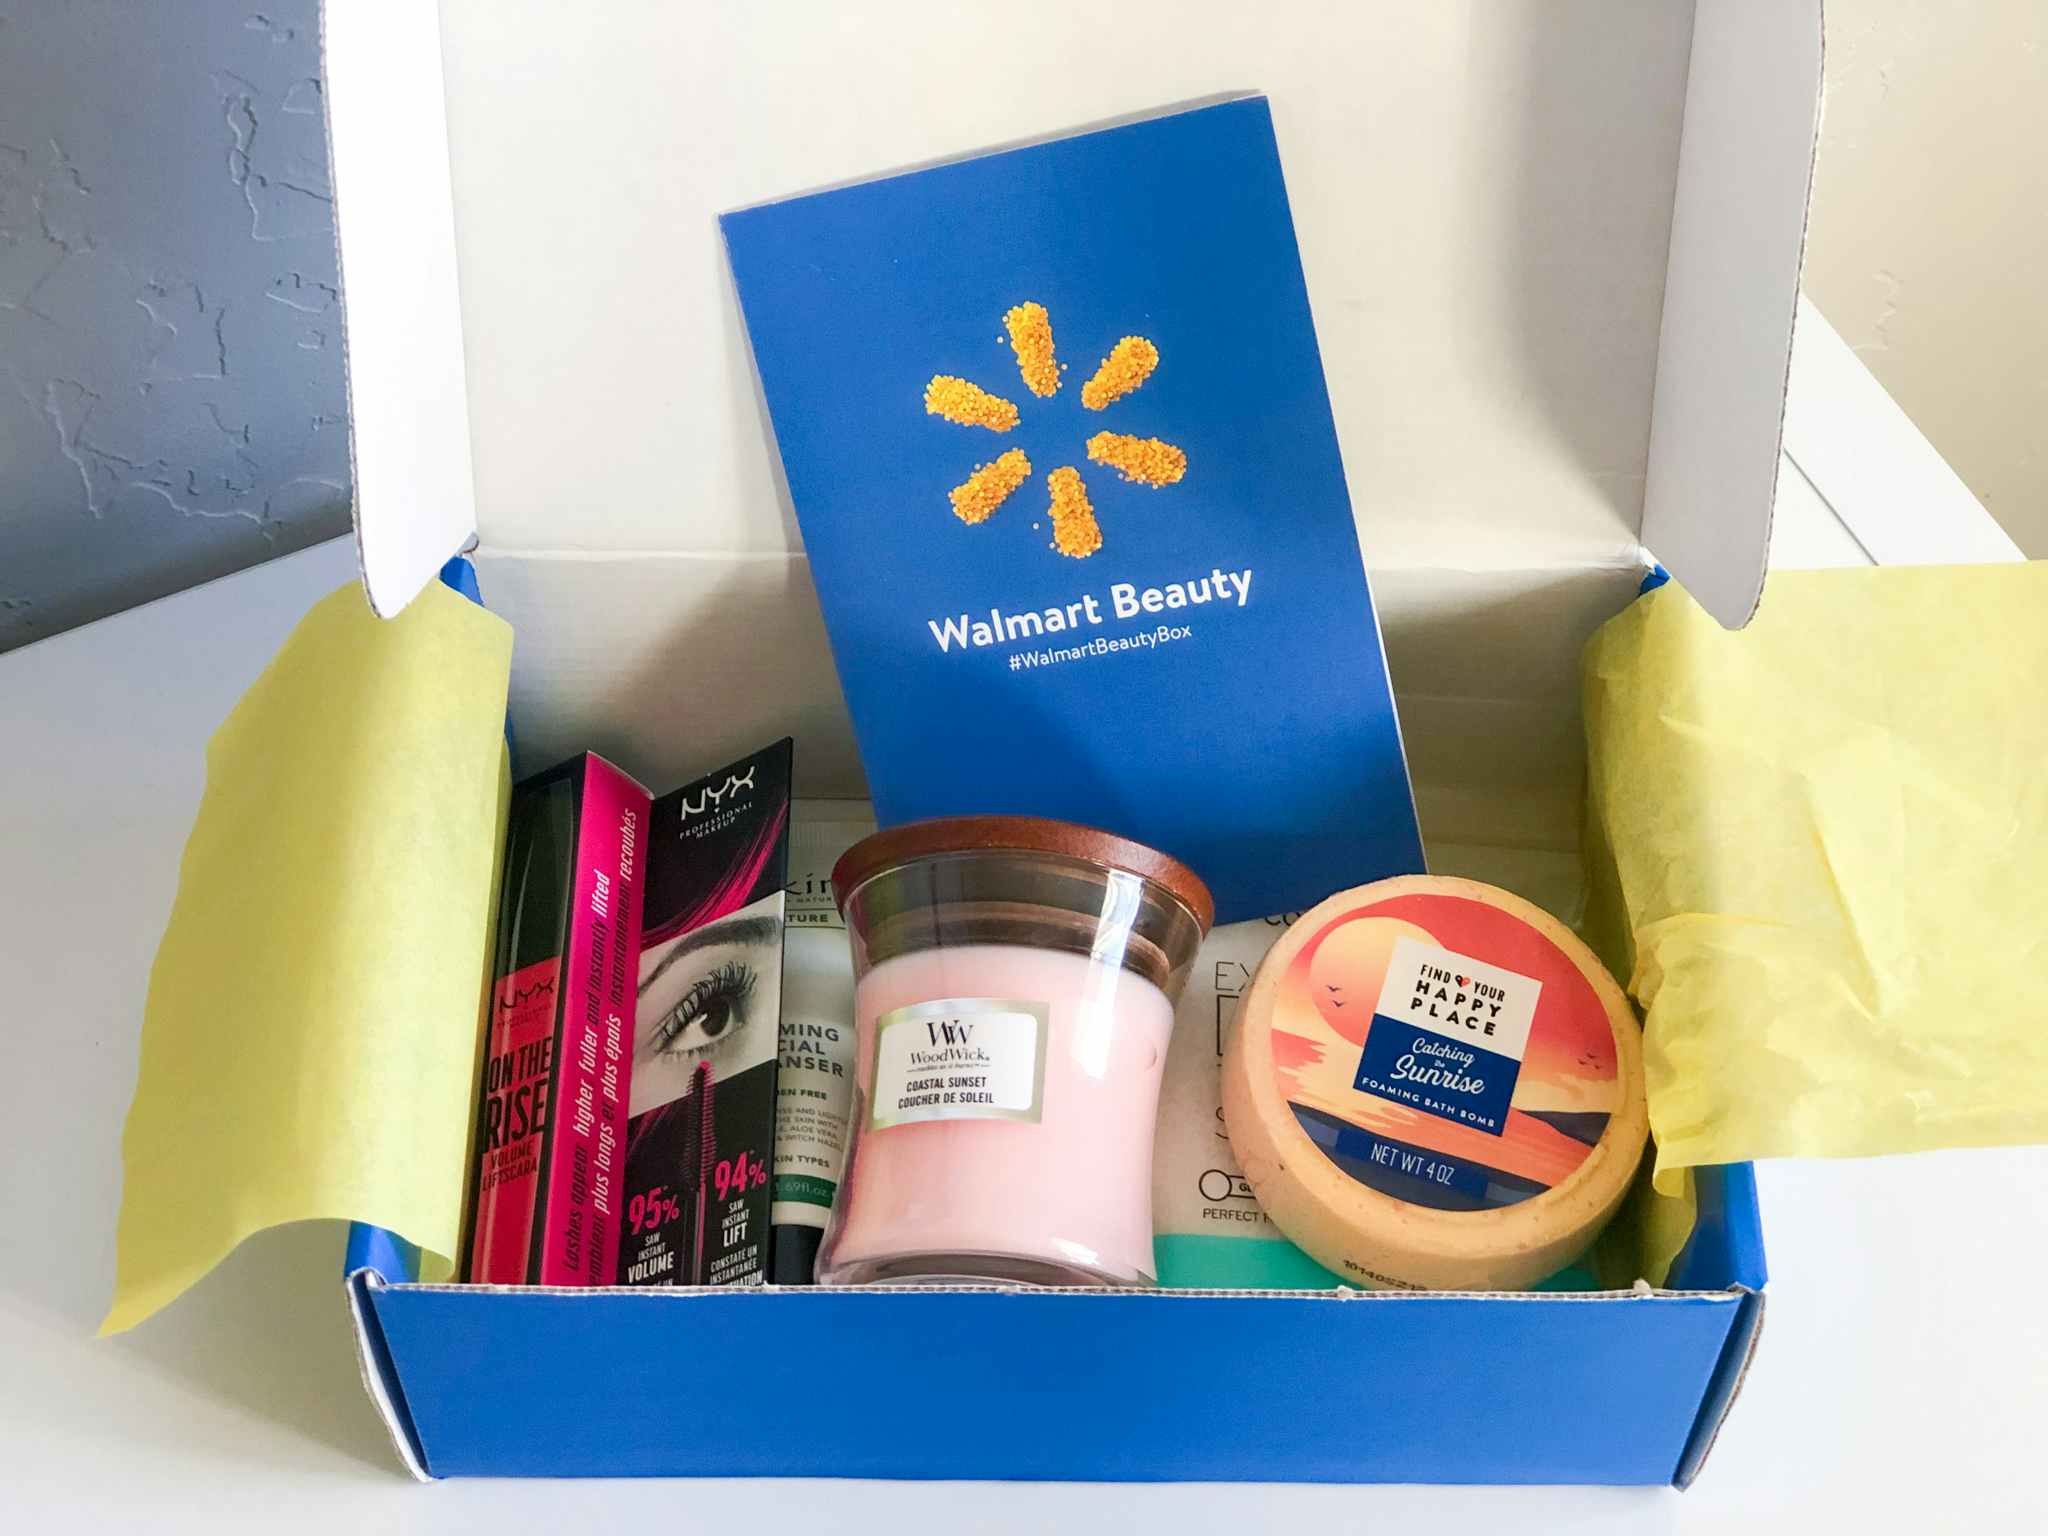 A Walmart beauty box, with makeup and other beauty products, sitting open on a table.